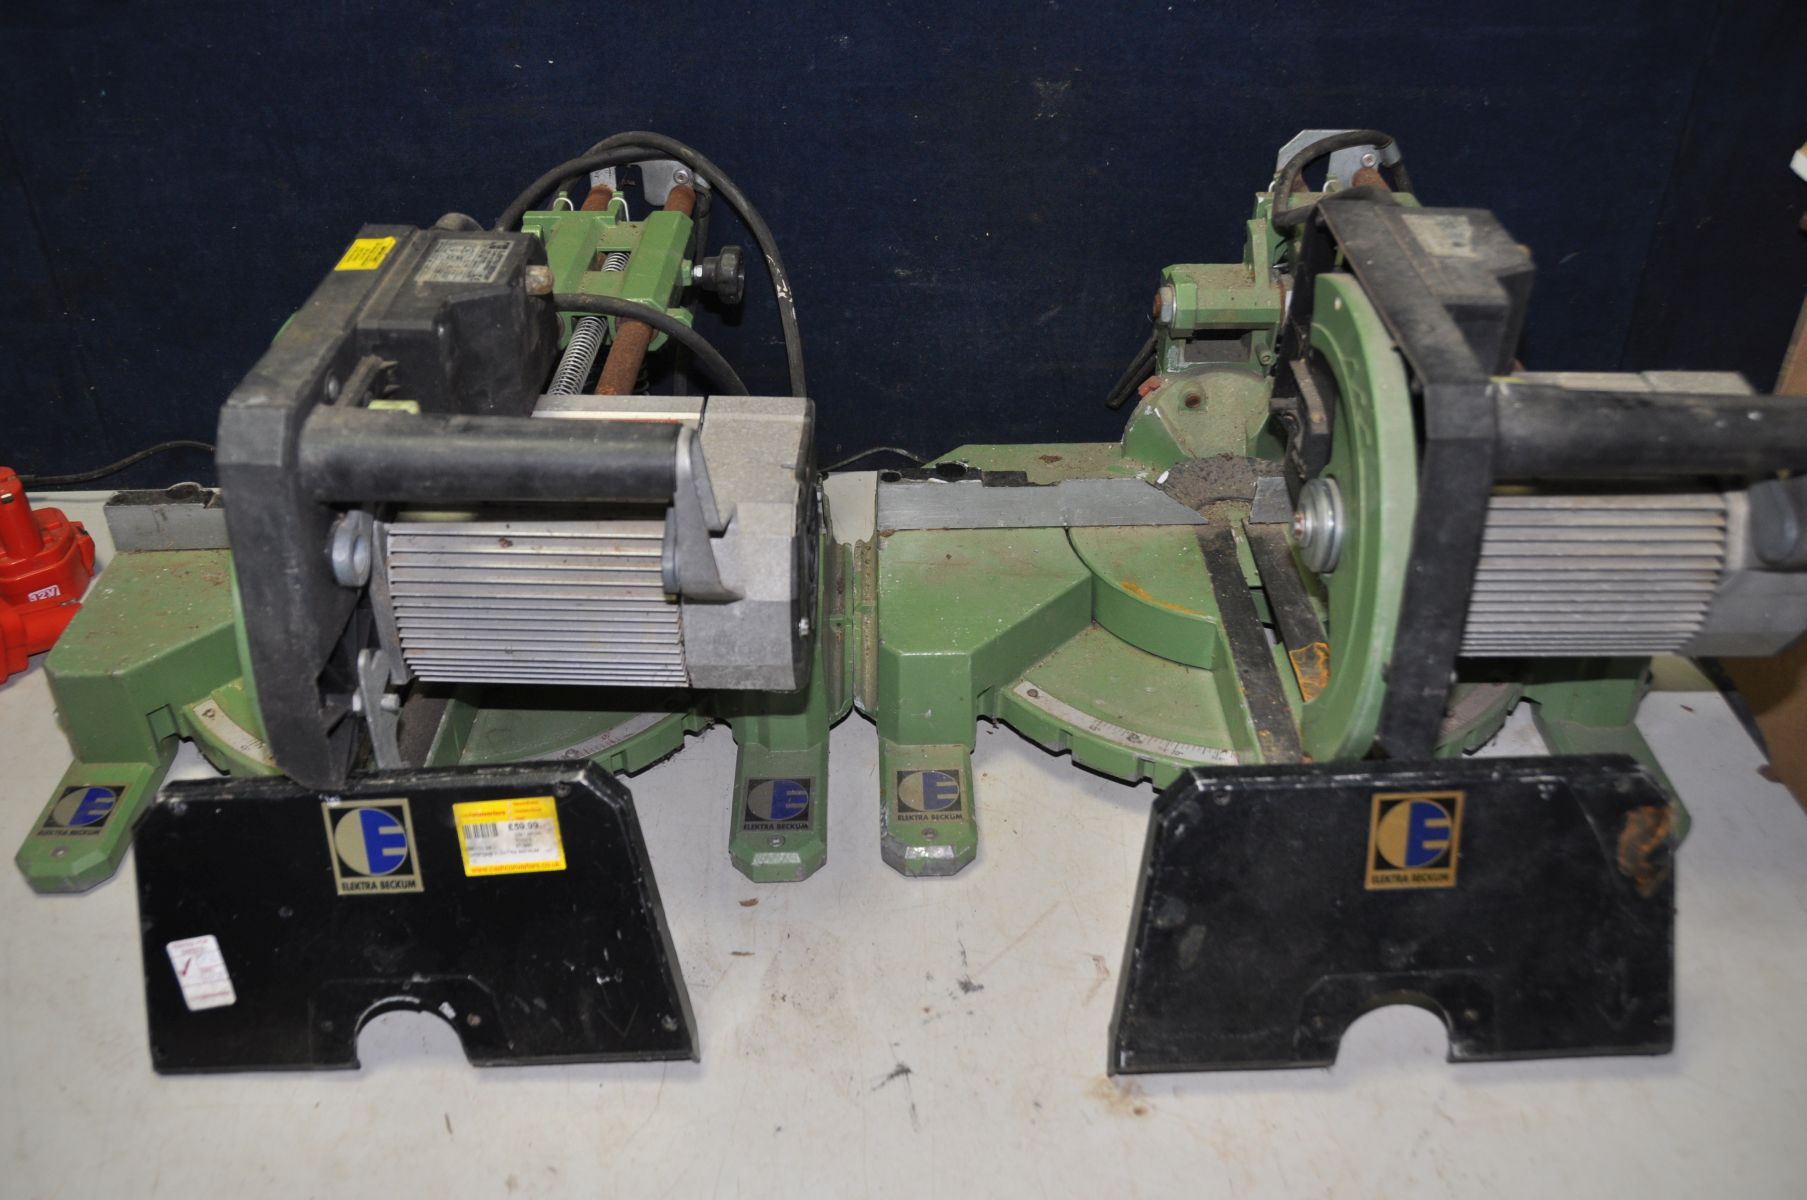 TWO ELECTRA BECKUM KGS300 sliding cross cut mitre saws (no blades and side panel loose and missing